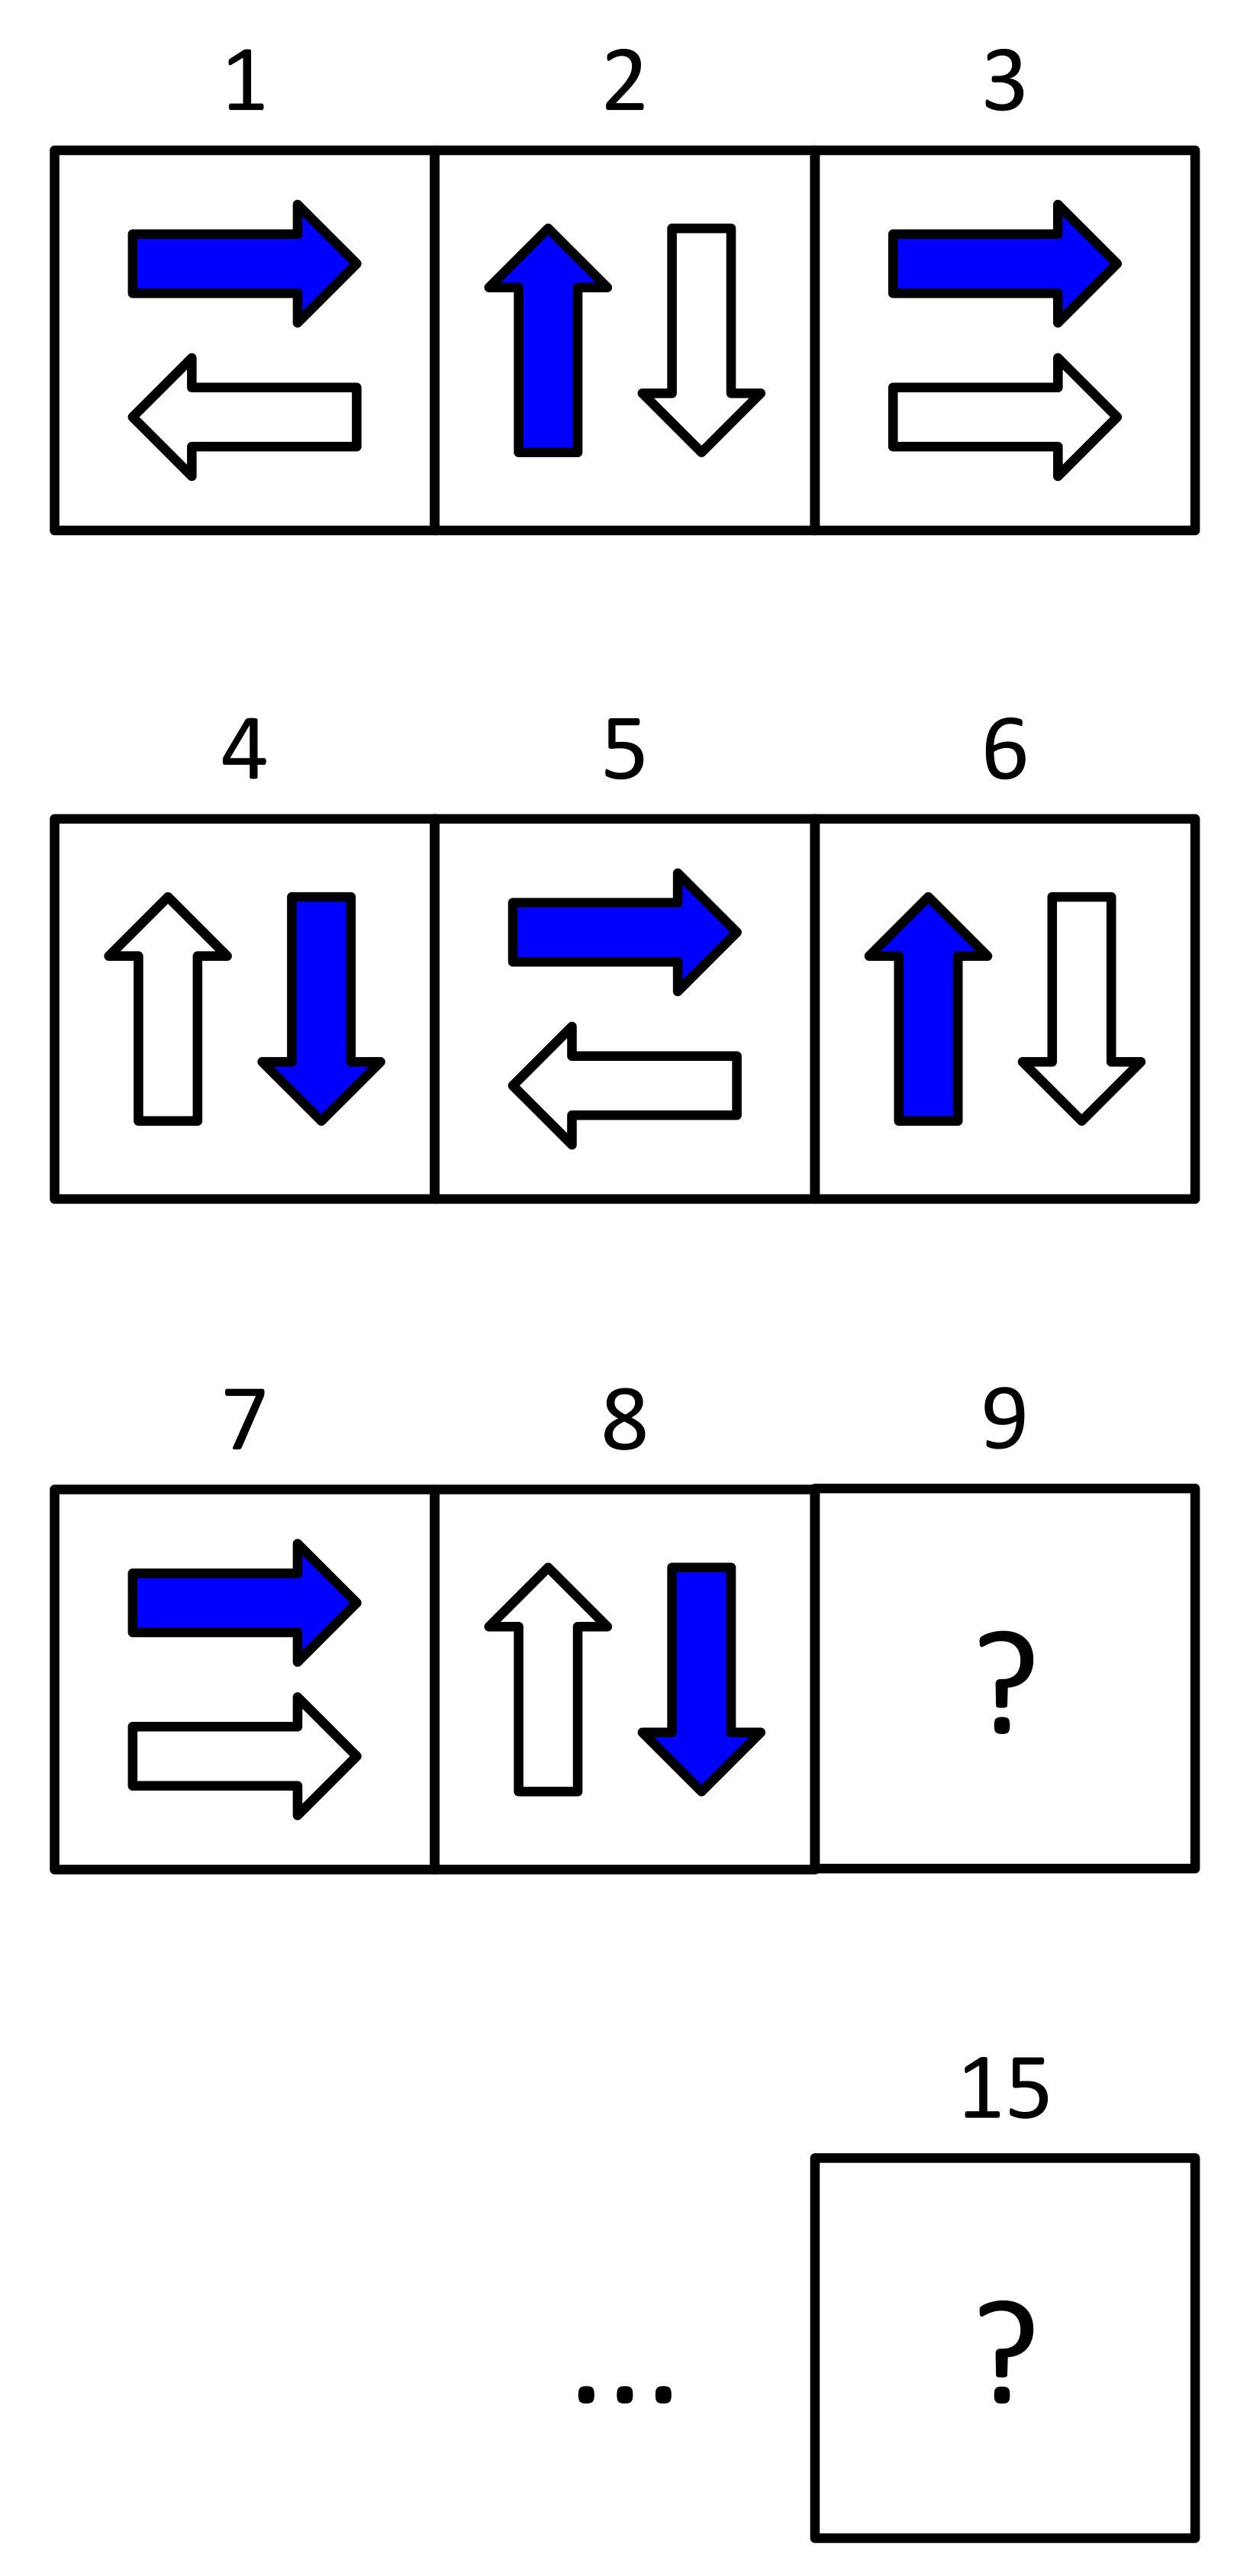 Eight tiles labelled 1 through 8. Tile 1 has a blue arrow pointing right and a white arrow pointing left. Tile 2 has a blue arrow pointing up and a white arrow pointing down. Tile 3 has a blue arrow and a white arrow both pointing right. Tile 4 has a white arrow pointing up and a blue arrow pointing down. Tile 5 is identical to tile 1, tile 6 is identical to tile 2, tile 7 is identical to tile 3, and tile 8 is identical to tile 4.